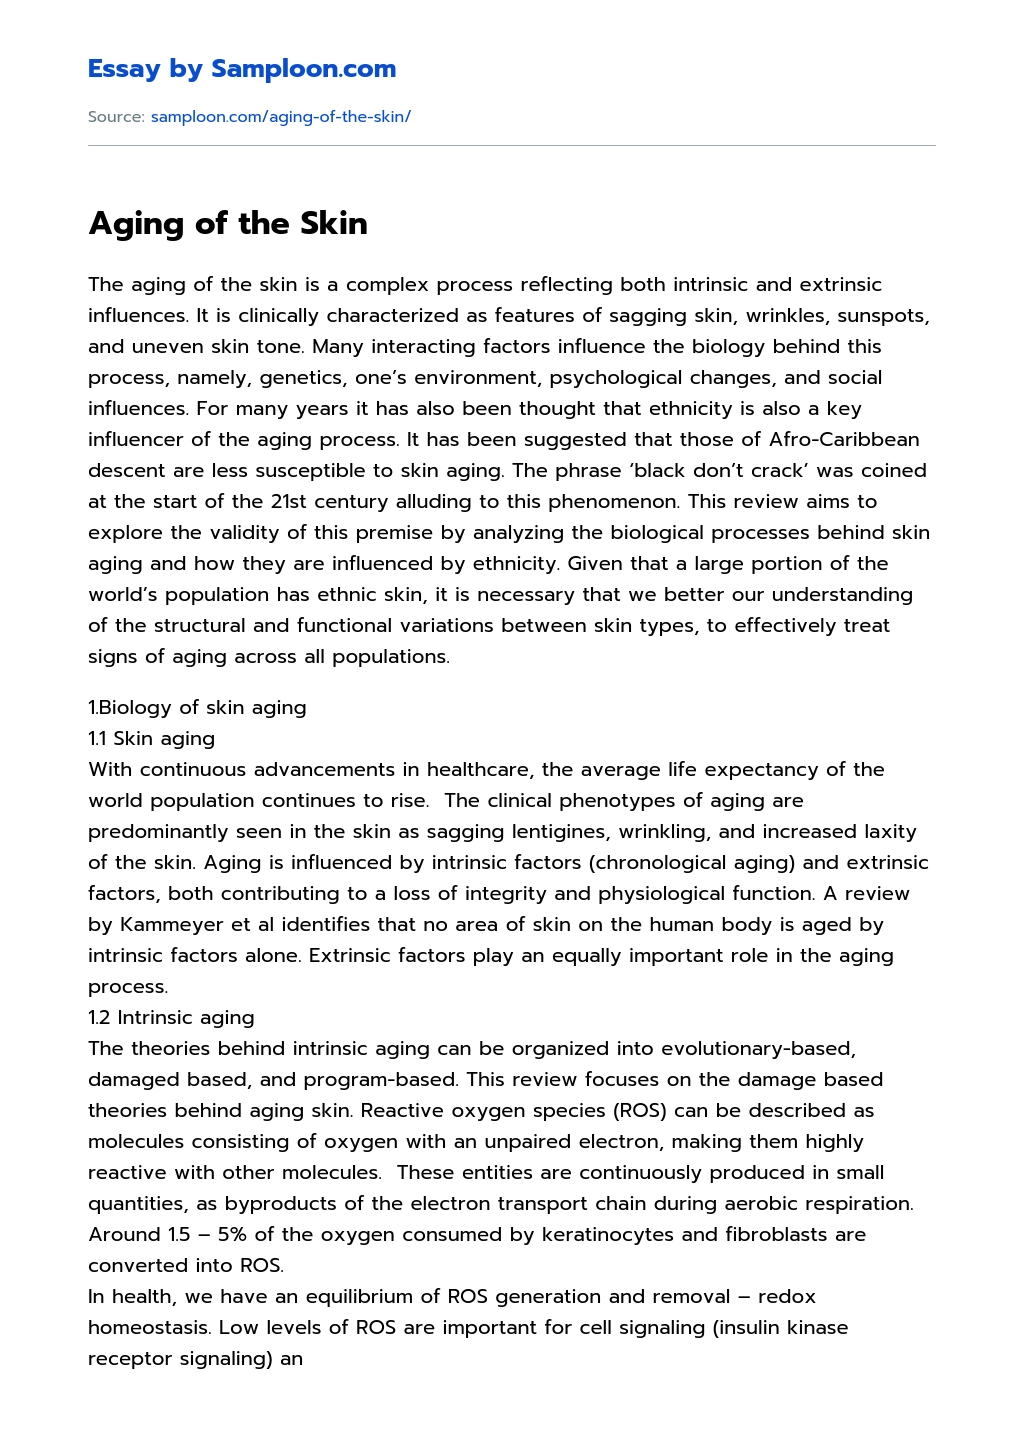 Aging of the Skin essay